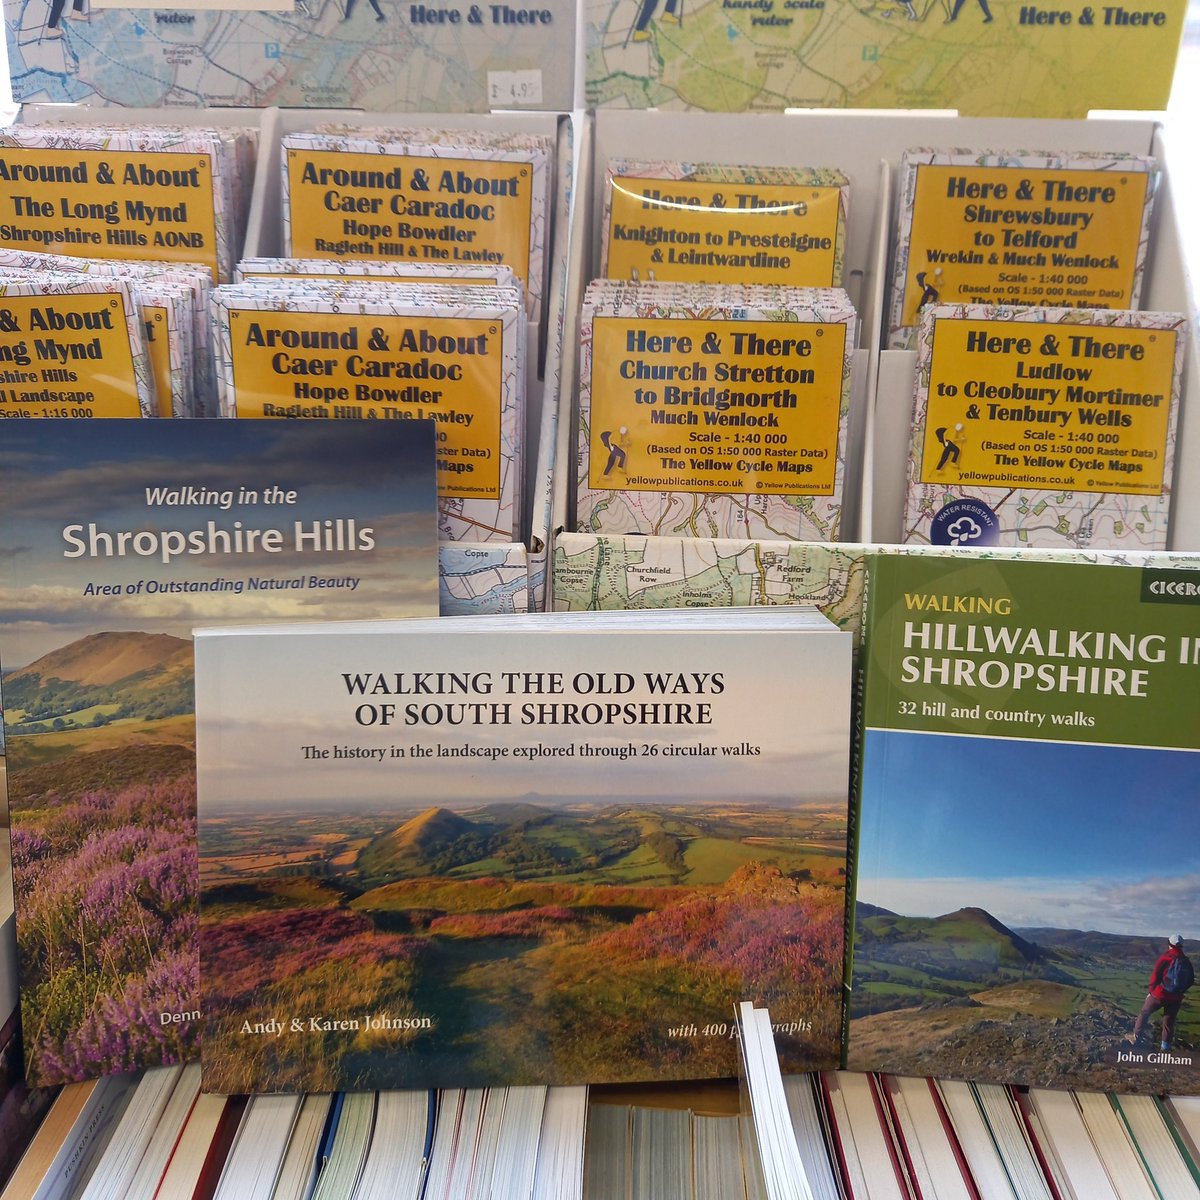 Quick! The sun's out! Grab a guide book and venture forth into the glorious Shropshire Hills! It's Friday 🎉 What are you reading this weekend? #burwaybooks #indiebookshop #Shropshire #ifyoulovebooksweloveyou #Bookworms #booksaremybag #bookshopdotorguk #walking